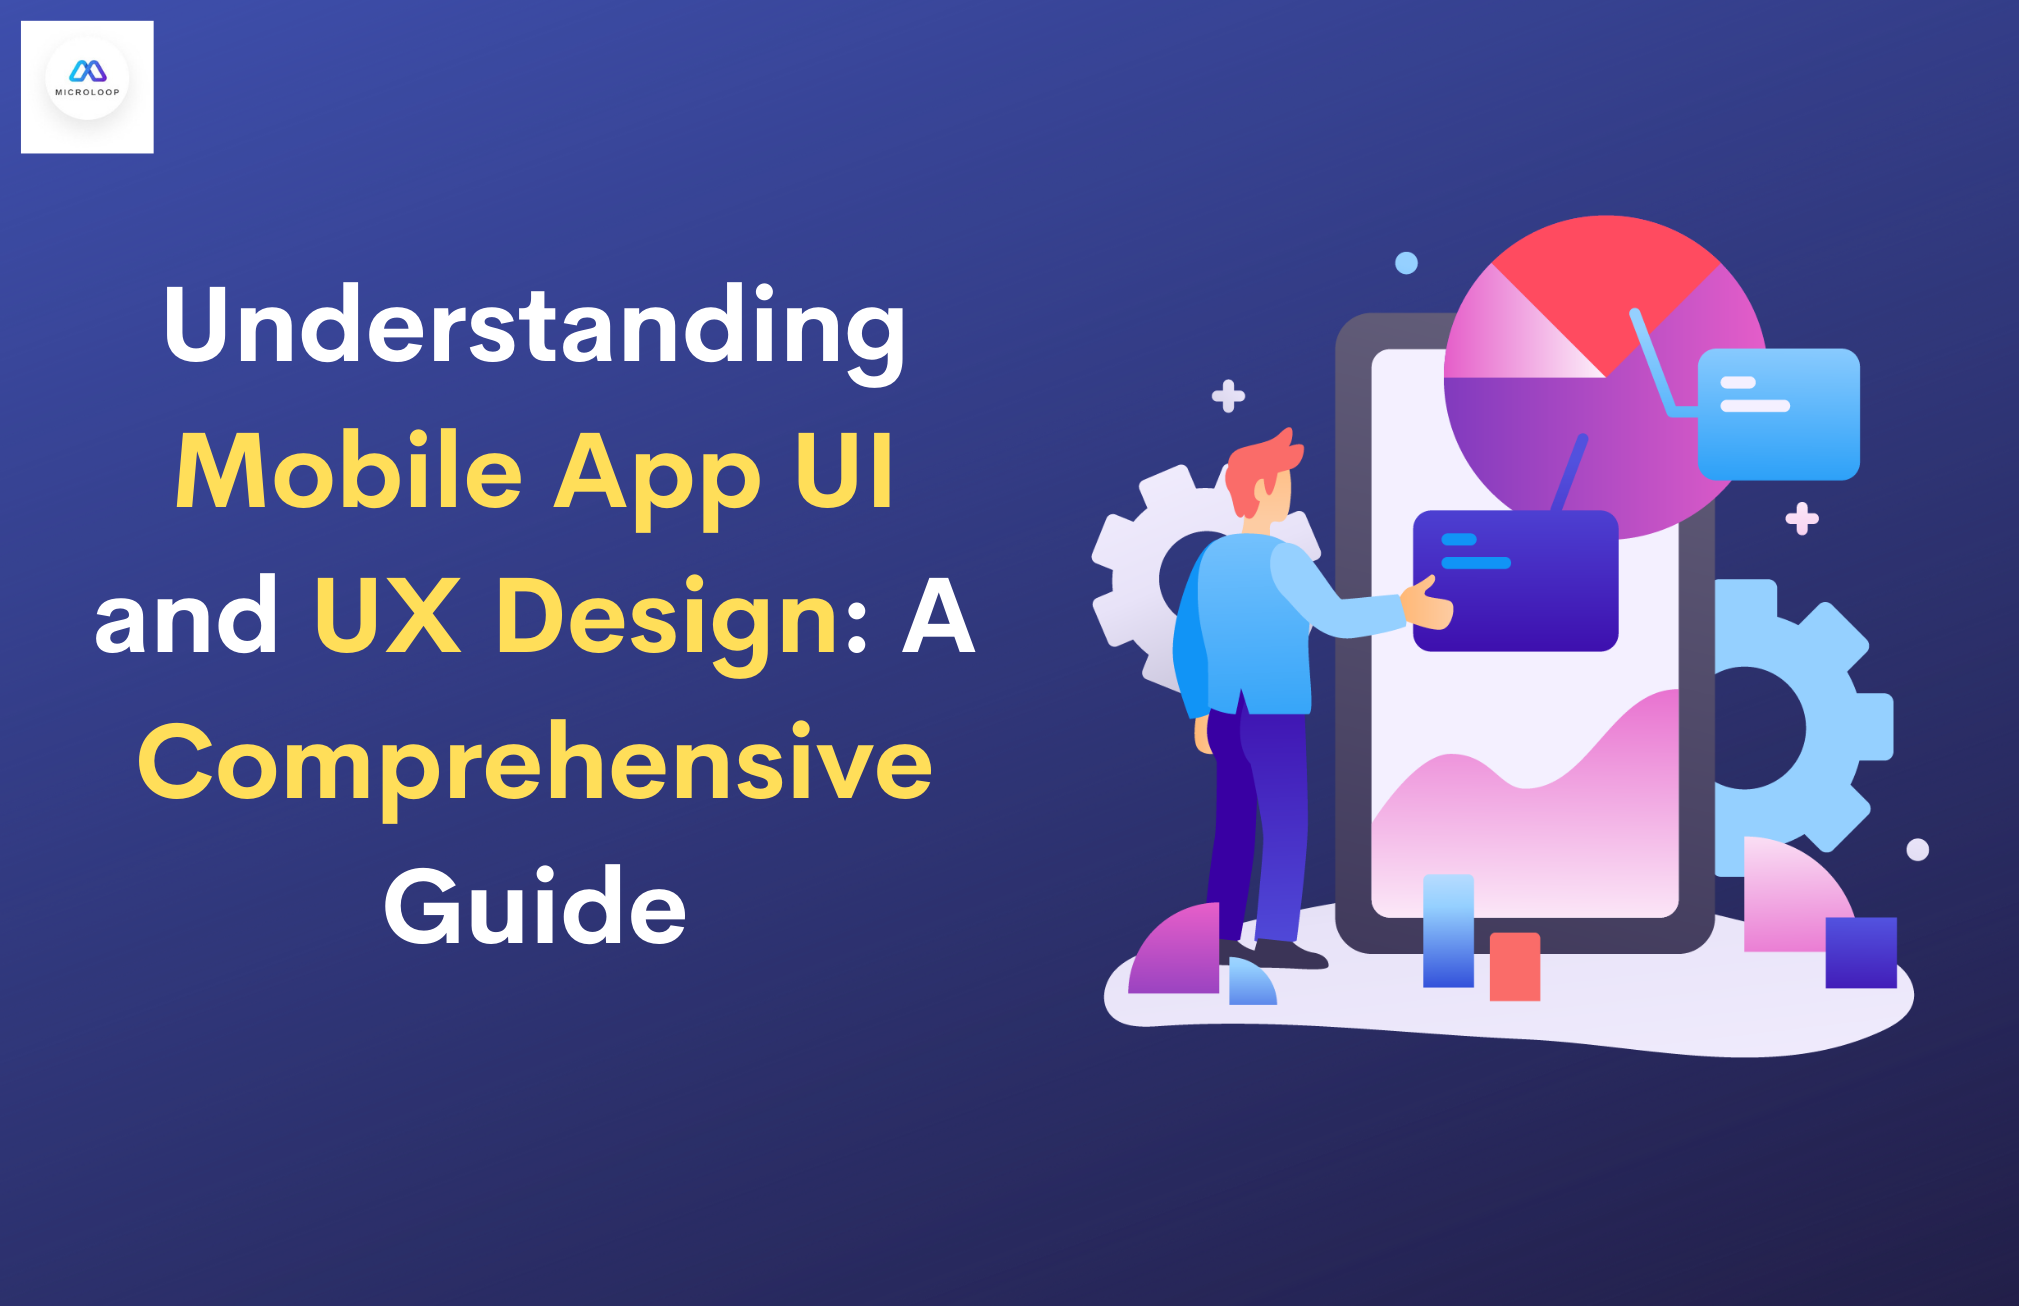 Understanding Mobile App UI and UX Design: A Comprehensive Guide